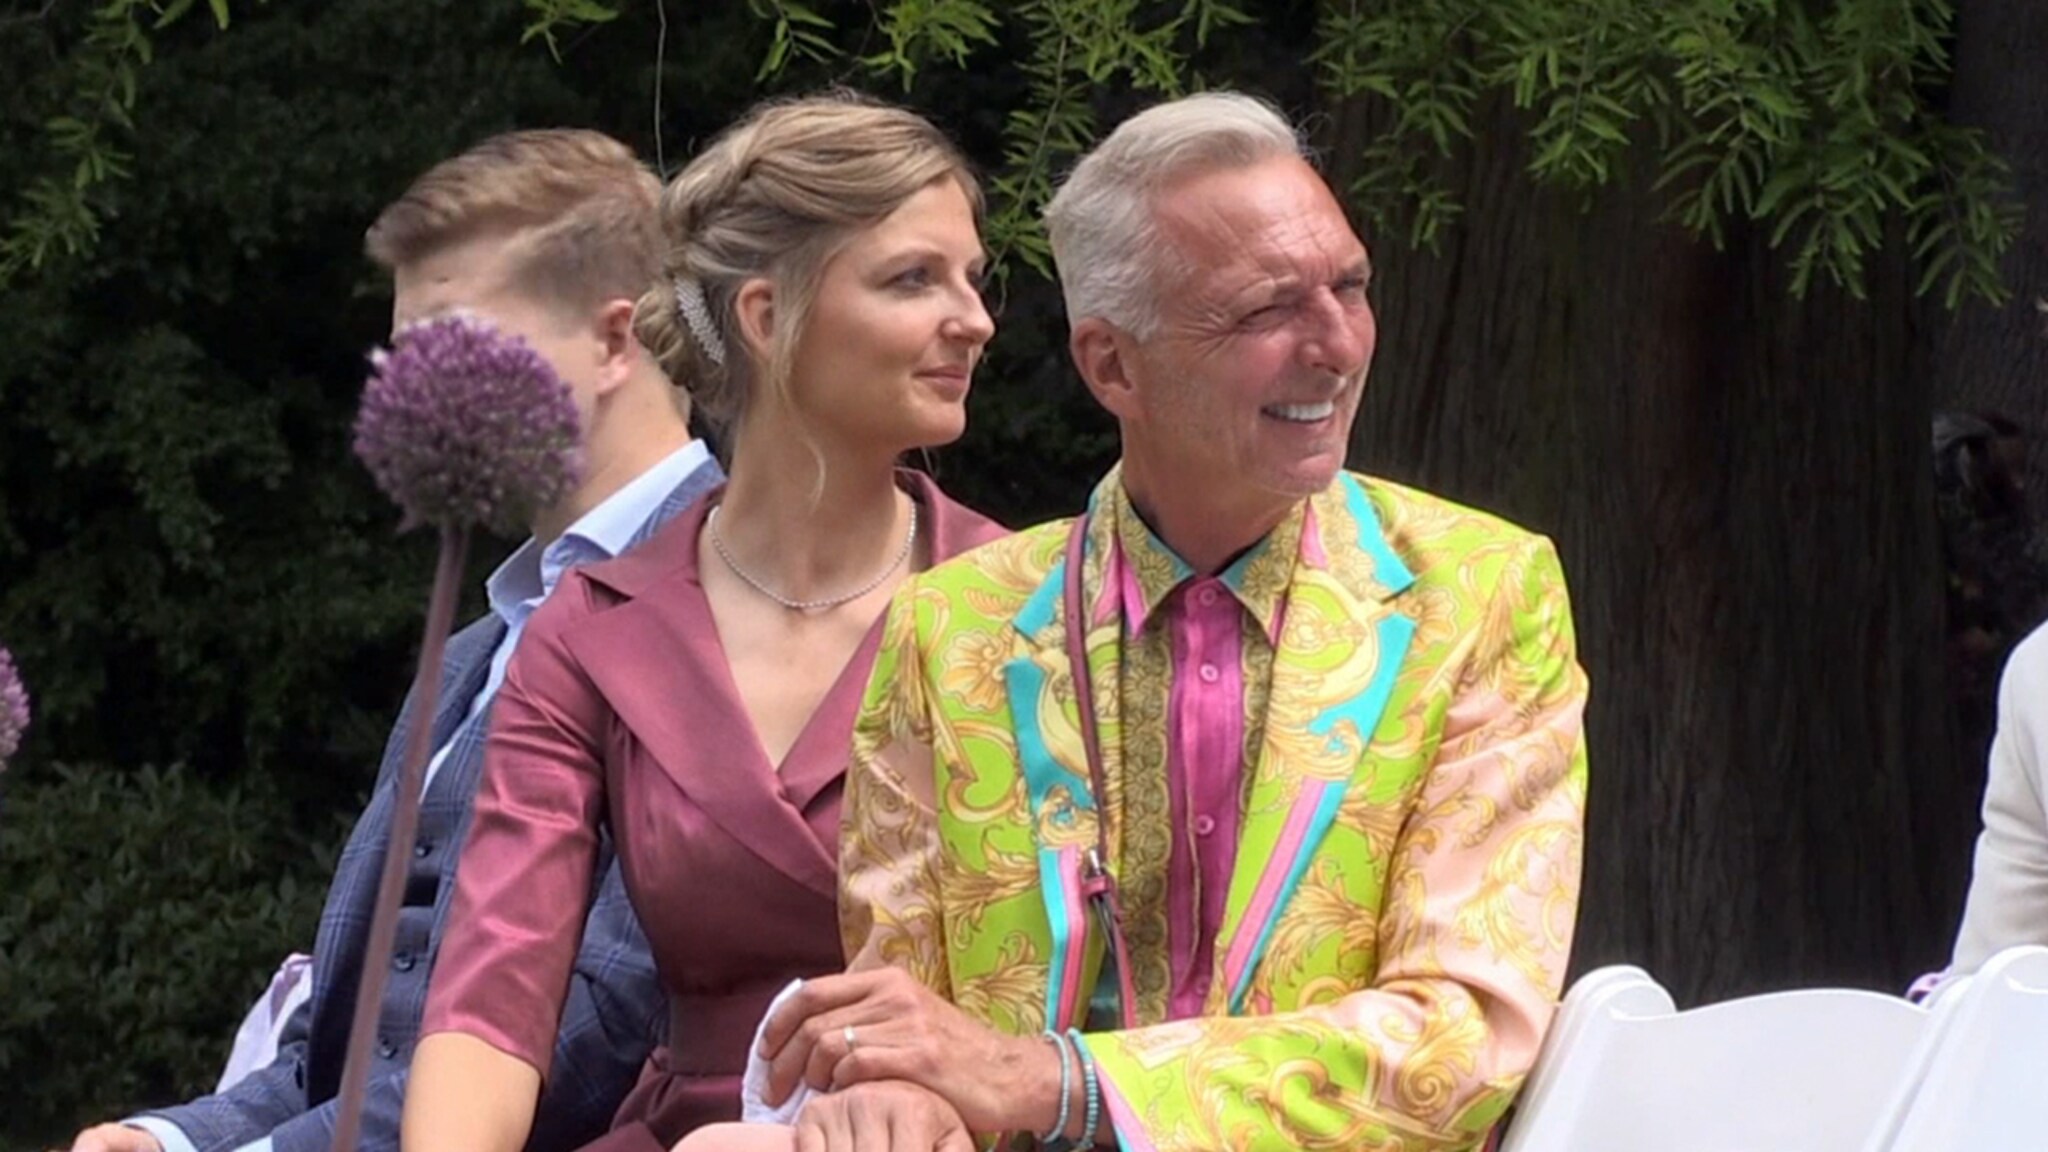 Chateau viewers: "Martine's cute outfit at Maxime's wedding ..."